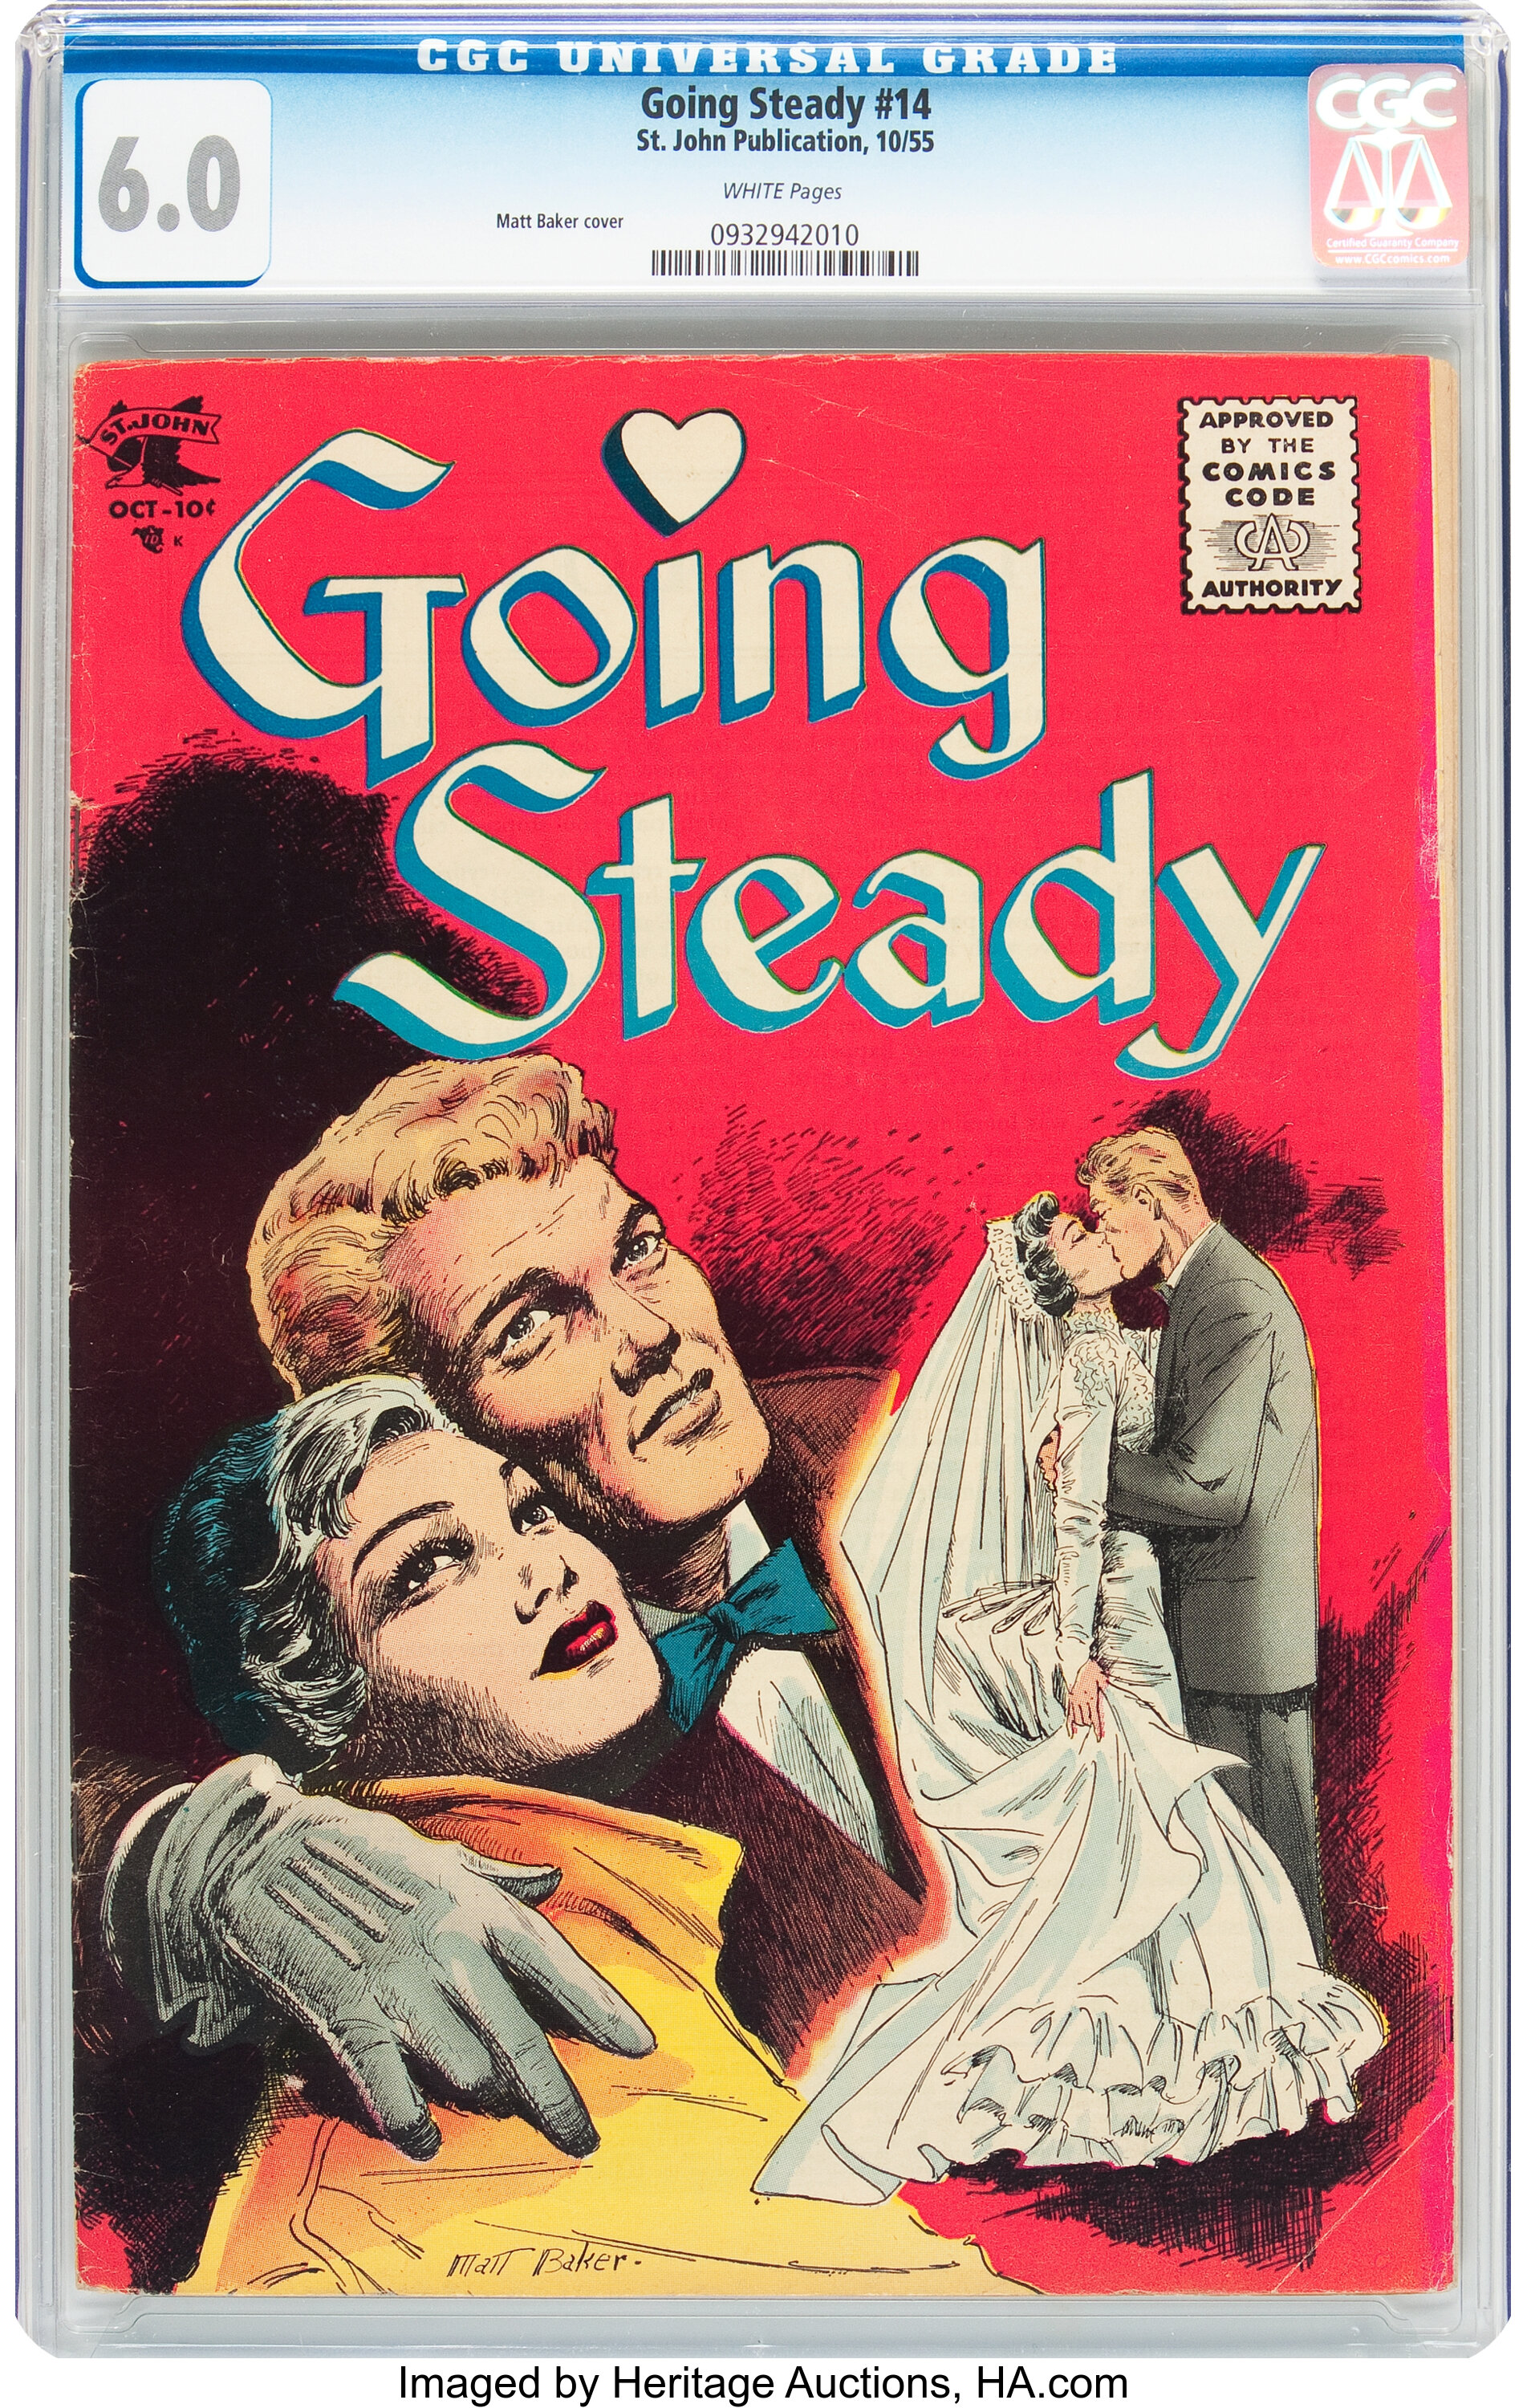 Going Steady #14 (St. John, 1955) CGC FN 6.0 White pages